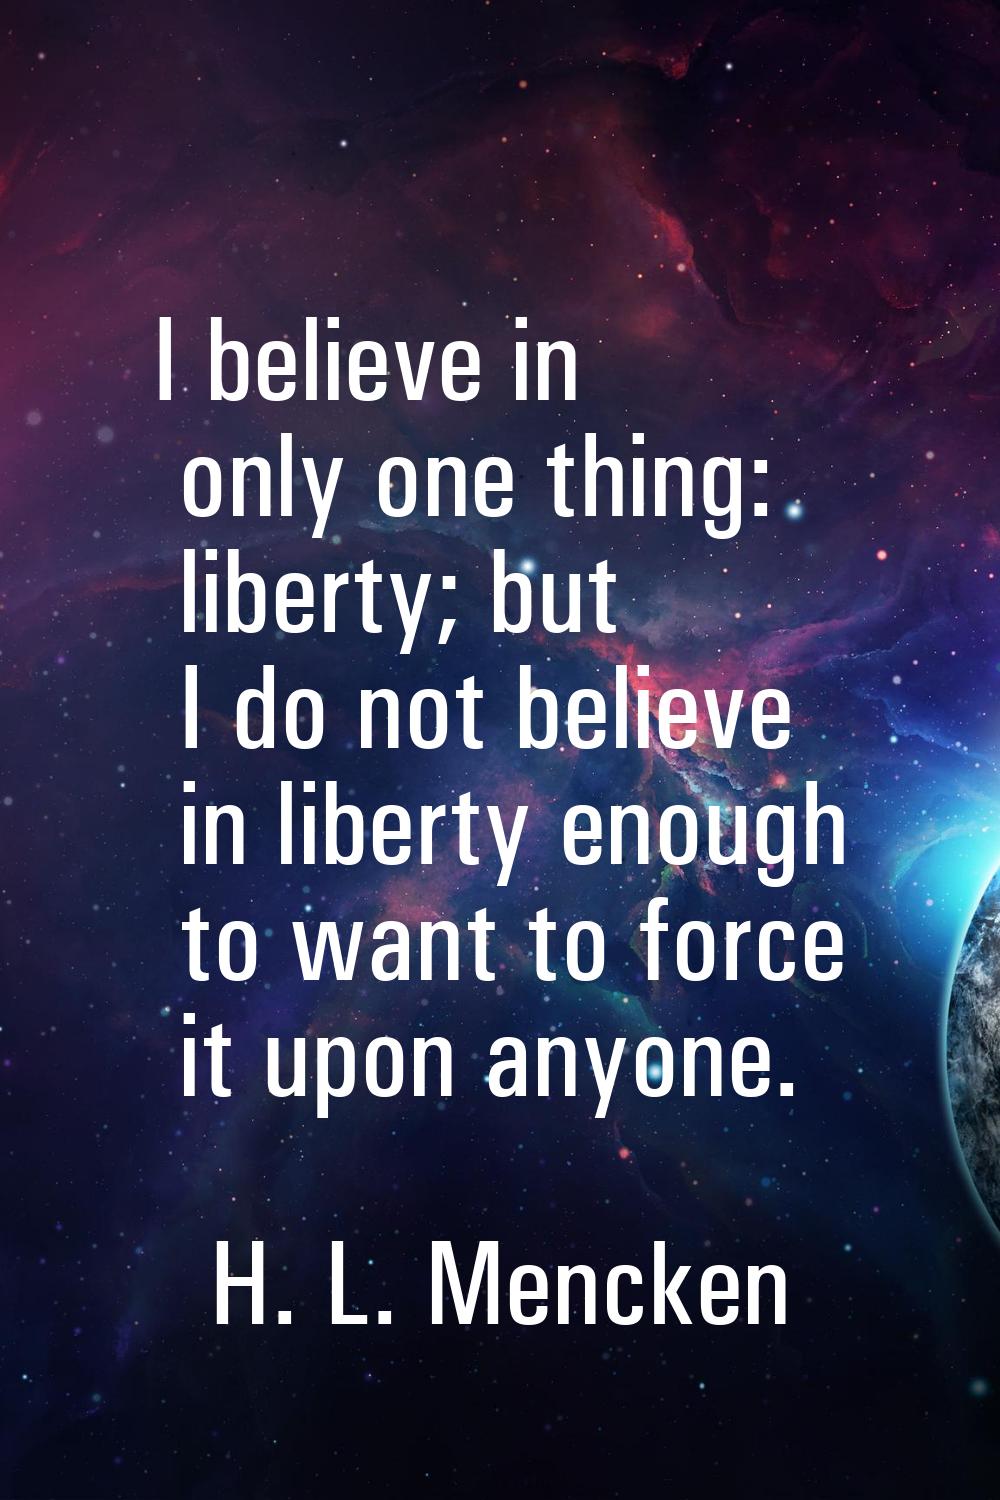 I believe in only one thing: liberty; but I do not believe in liberty enough to want to force it up